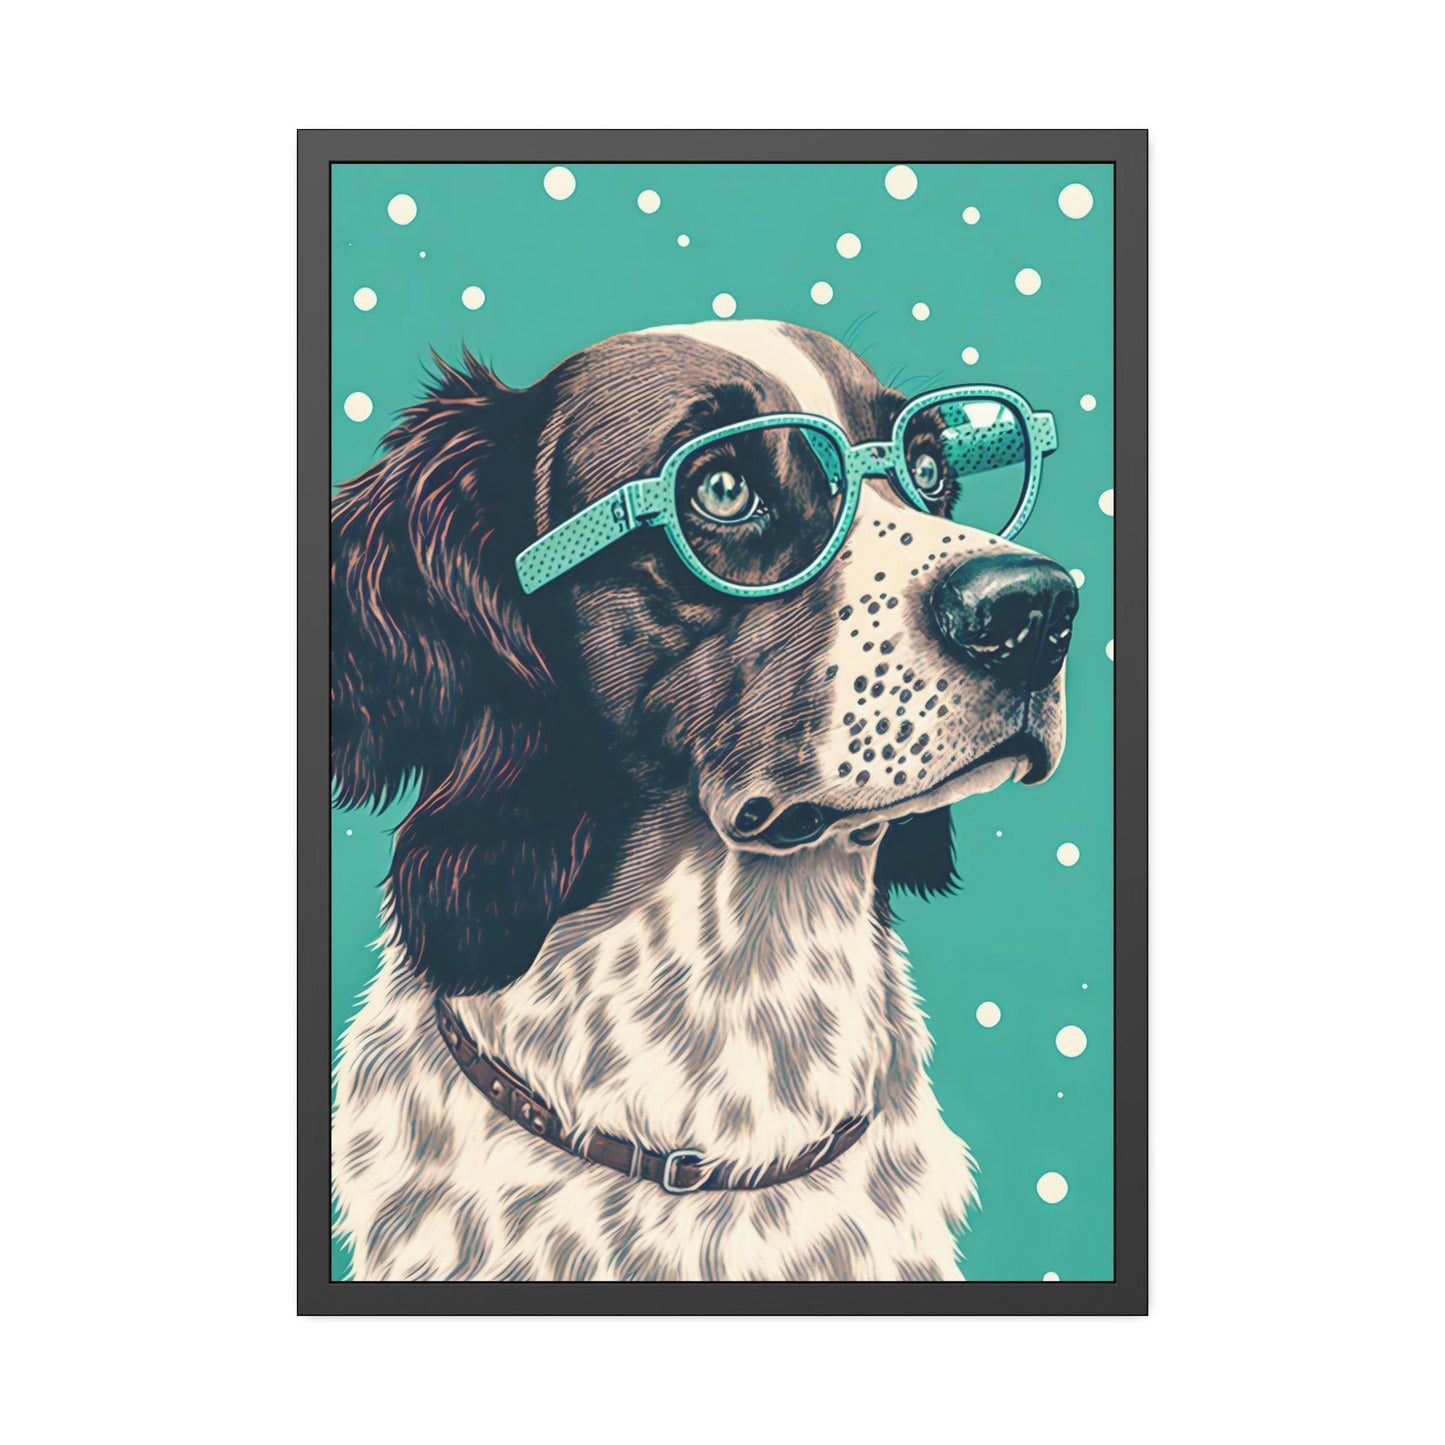 Playful Pooch: Print on Canvas of a Fun-Loving Dog on Framed Canvas